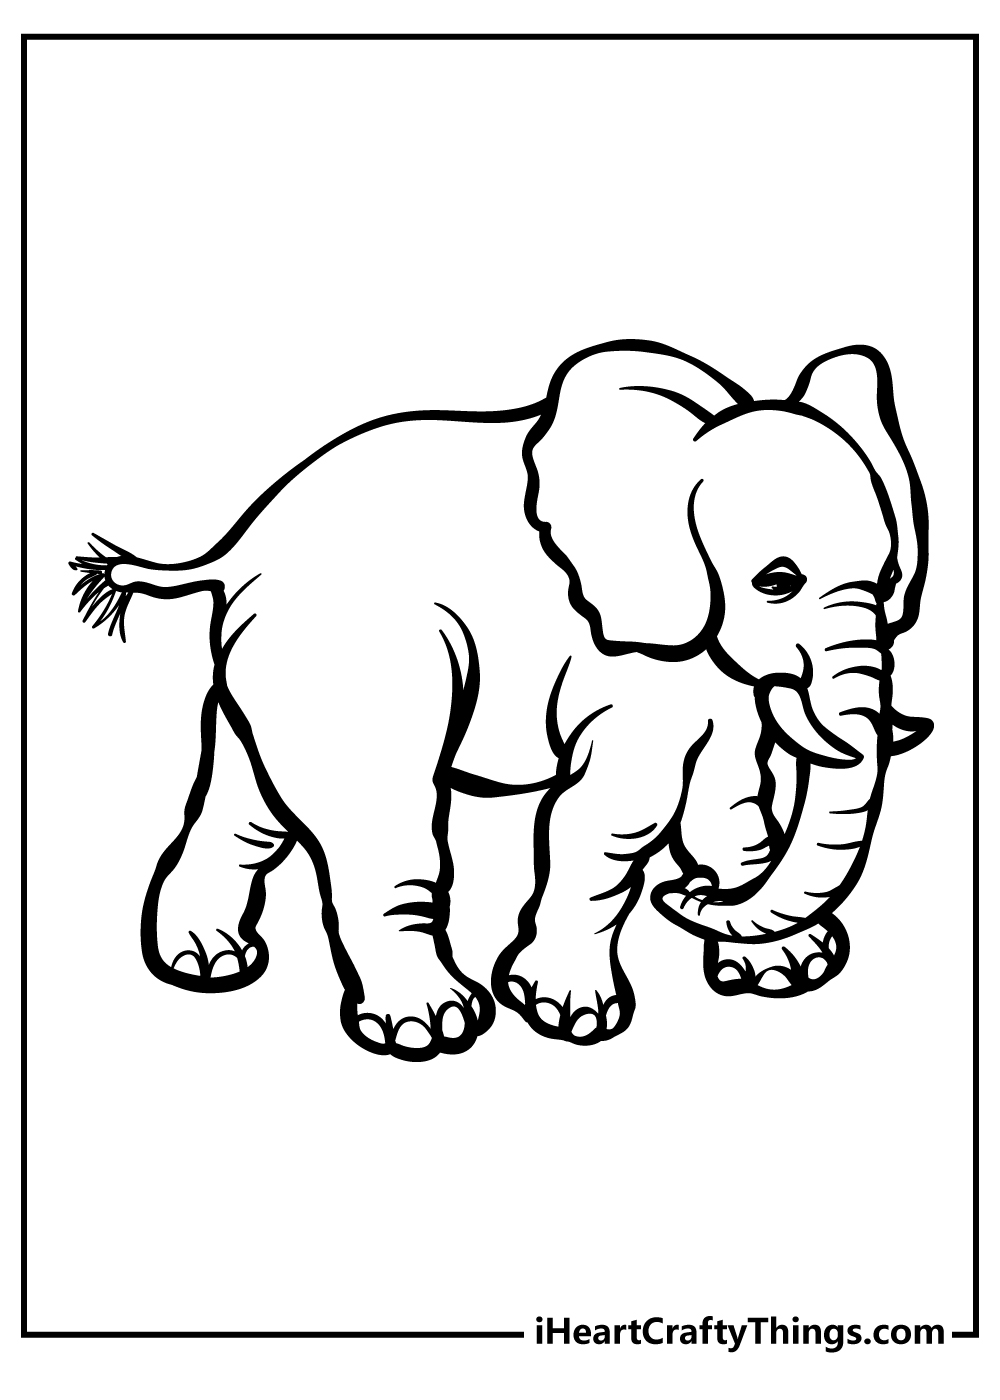 Printable Elephant Coloring Pages Updated 20